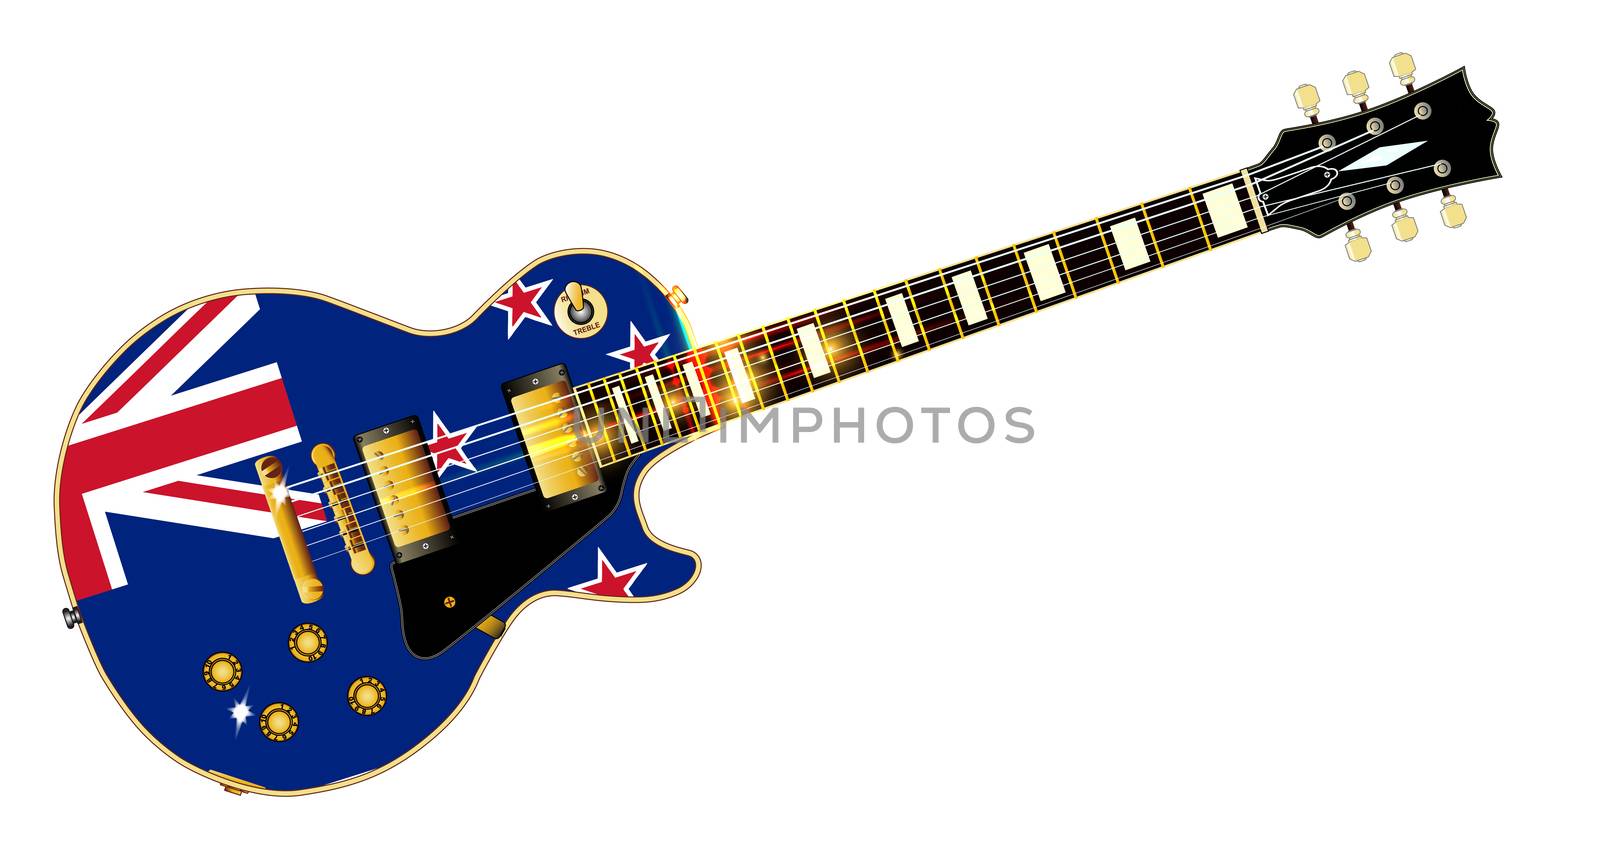 The definitive rock and roll guitar with the New Zealand flag isolated over a white background.